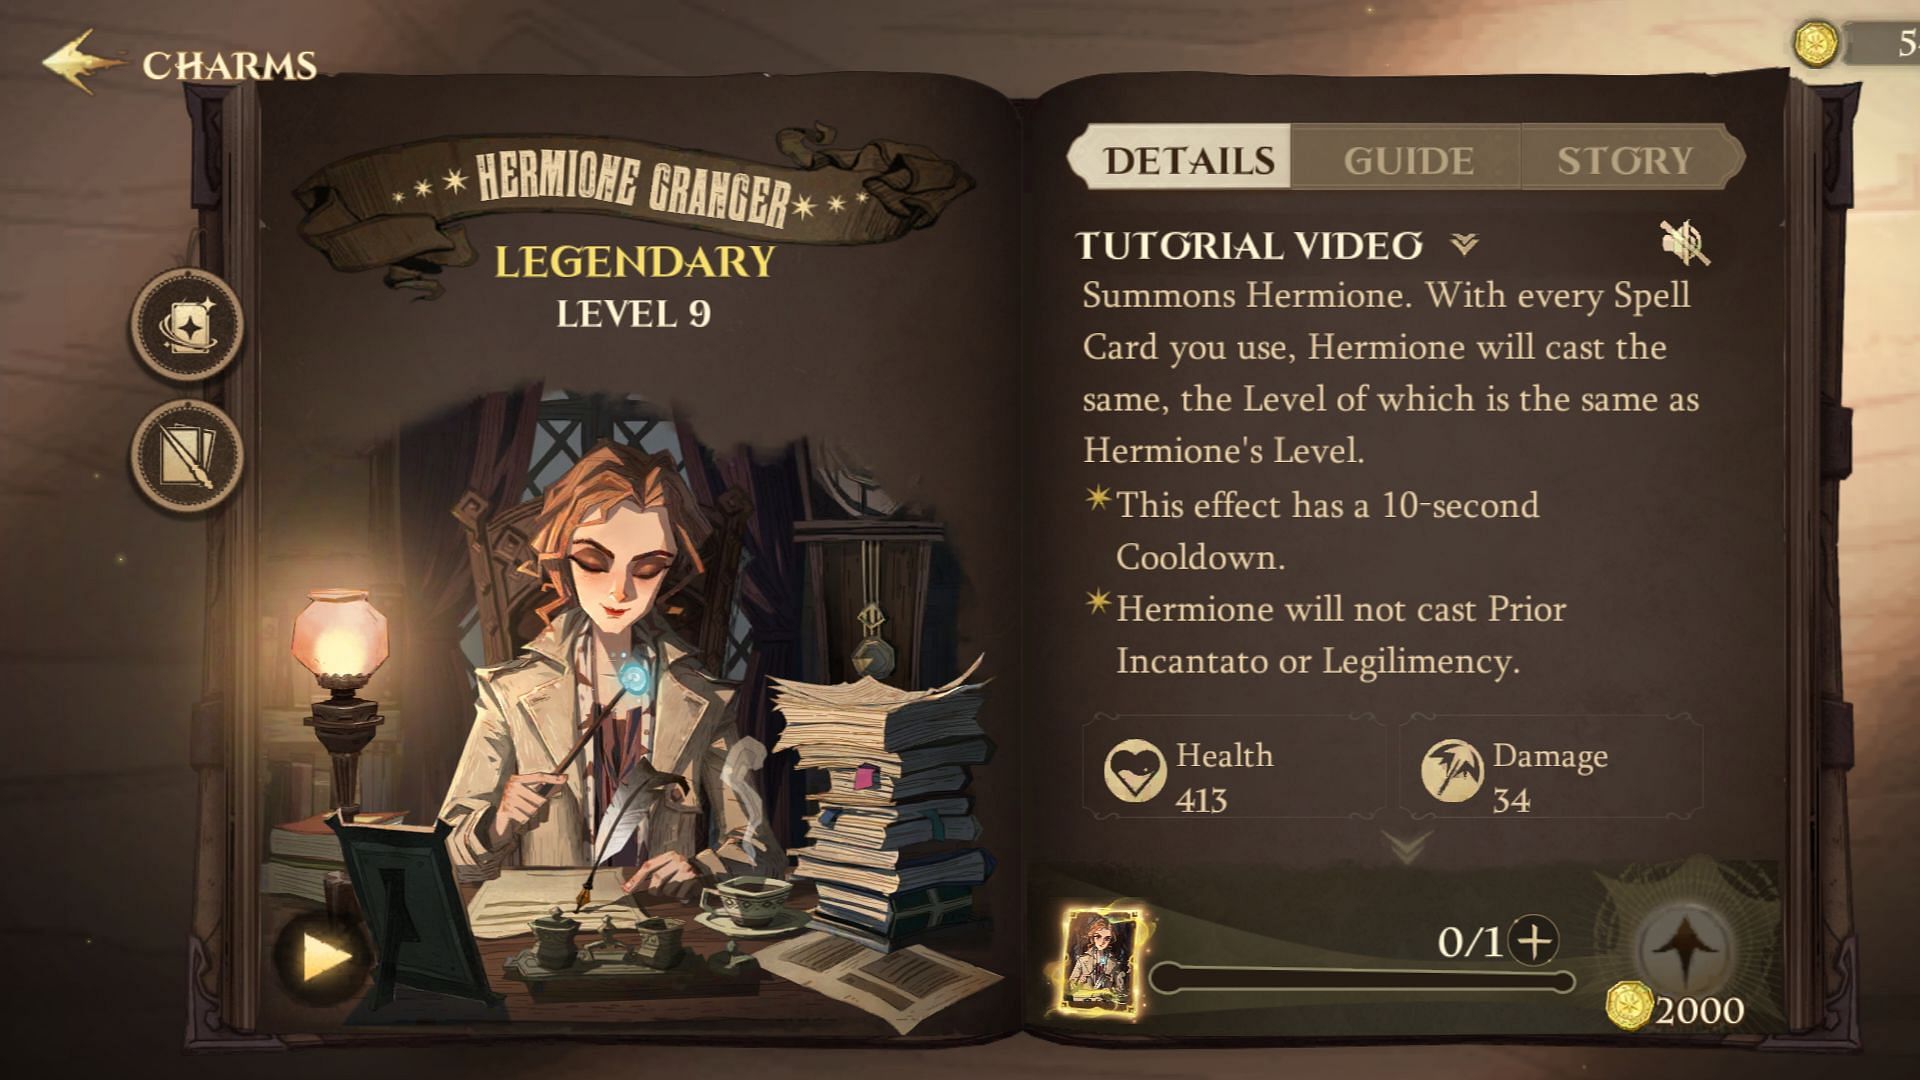 This card summons her and she casts the same spells as you (Image via Harry Potter Magic Awakened)